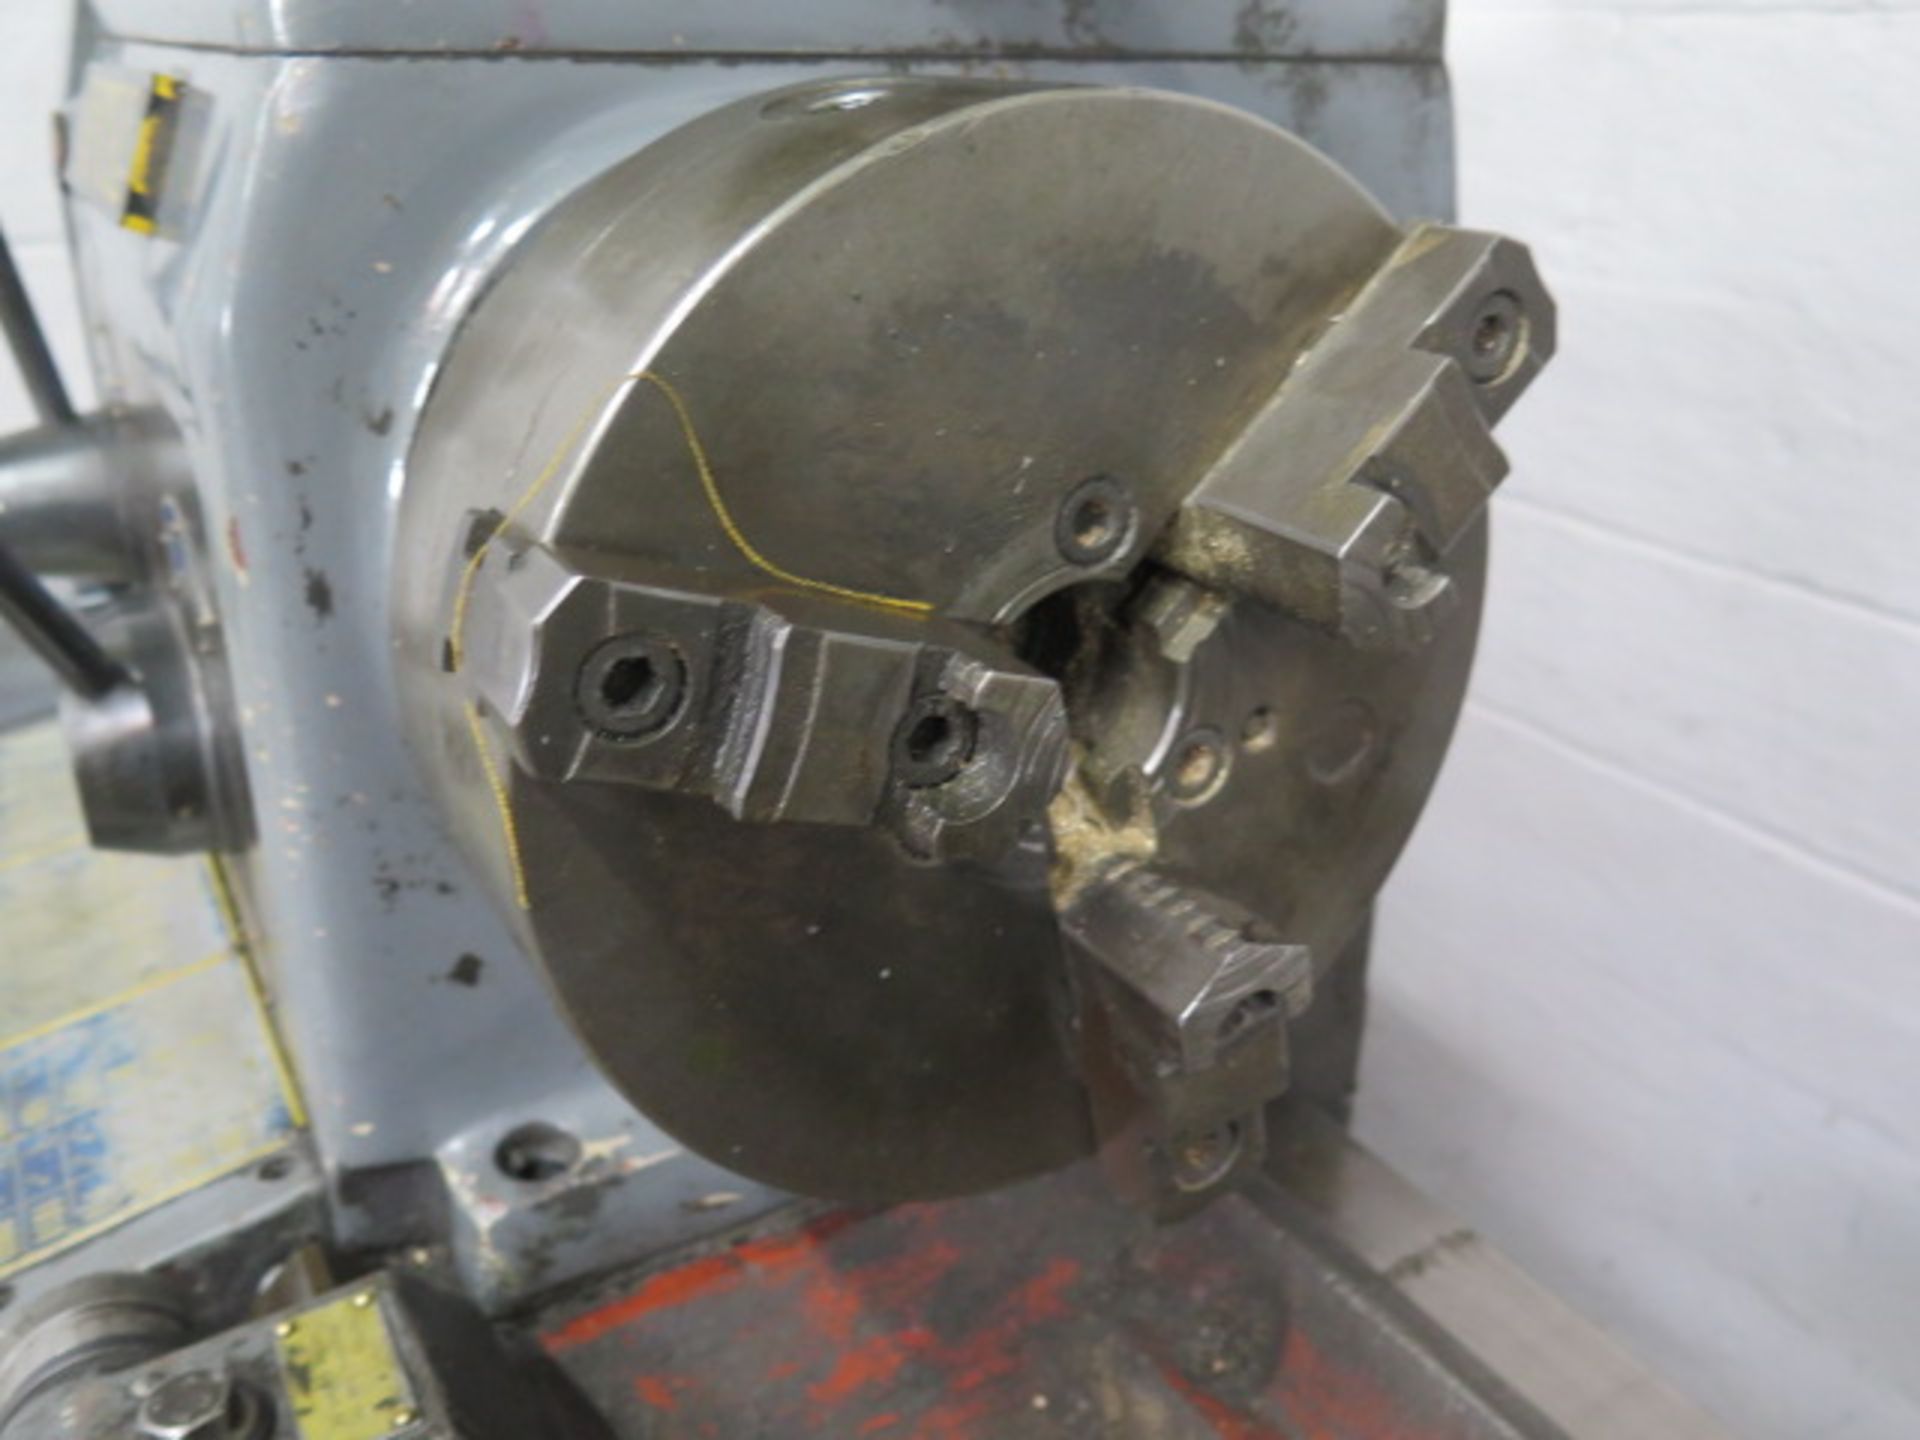 Royal 17” x 42” Geared Head Gap Bed Lathe s/n 79C928 w/ 32-1800 RPM, Taper Attachment, SOLD AS IS - Image 15 of 25